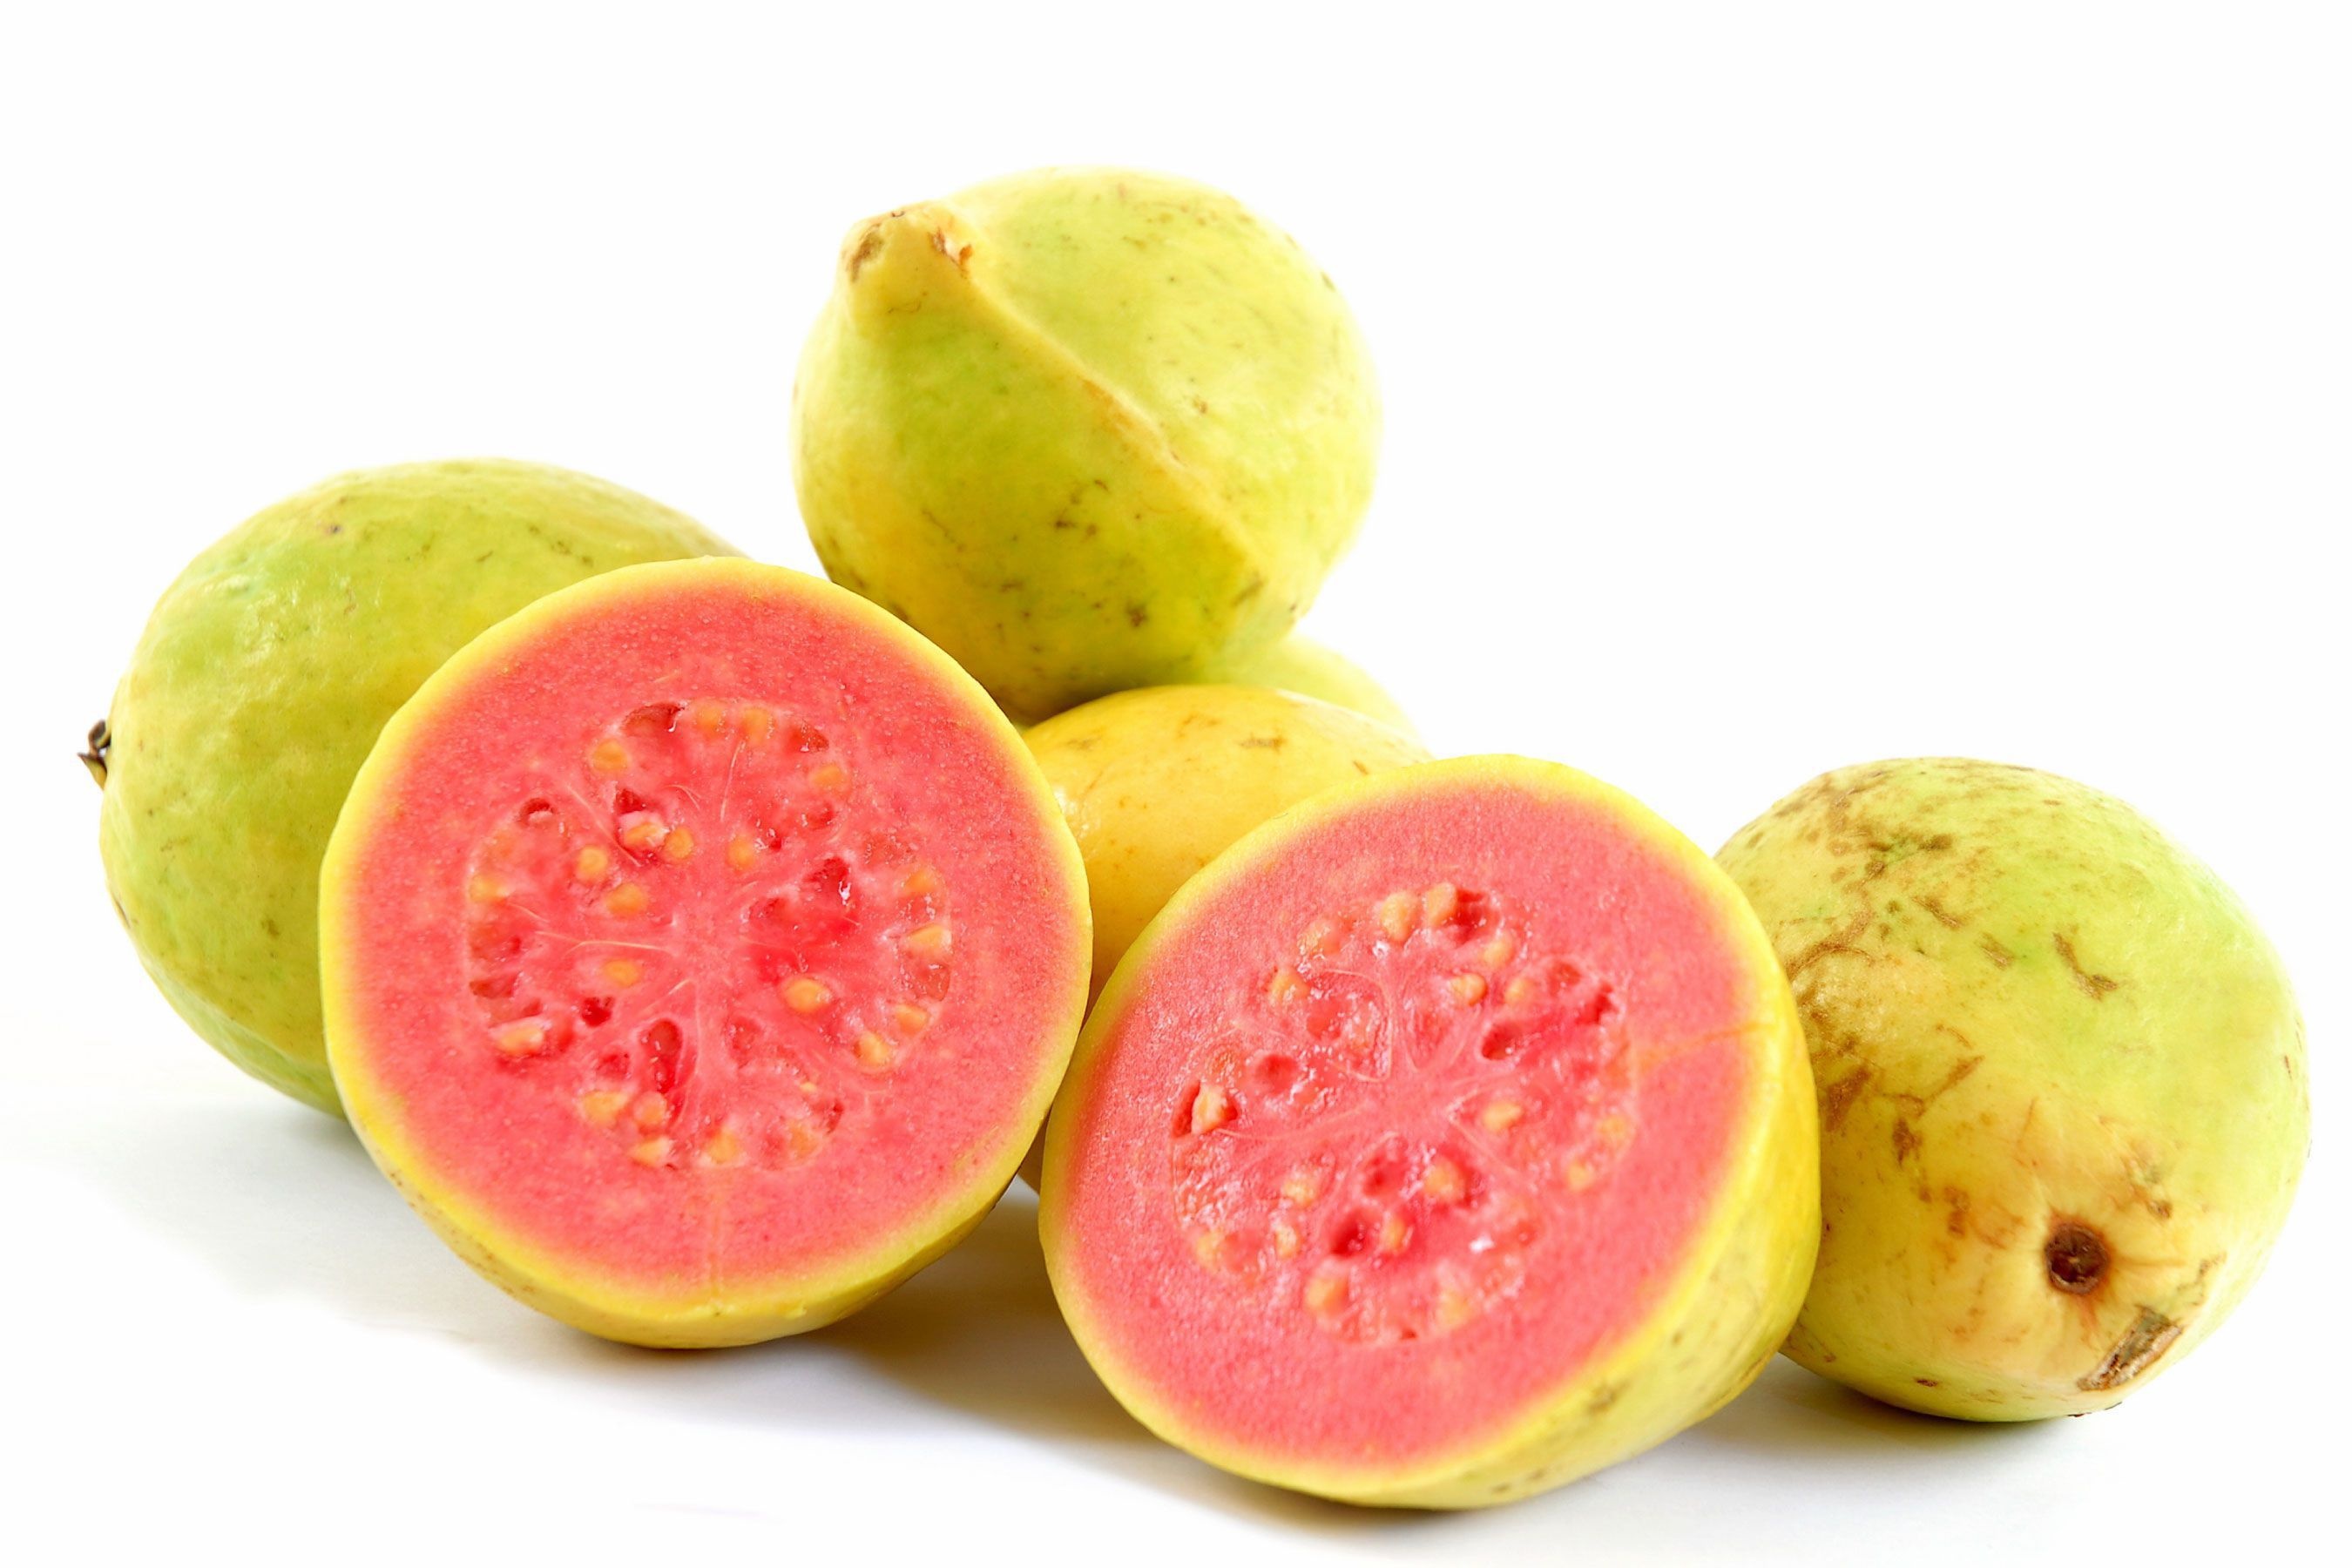 Guava: Psidium guajava, An edible fruit, and can be eaten raw or cooked. 2700x1800 HD Wallpaper.